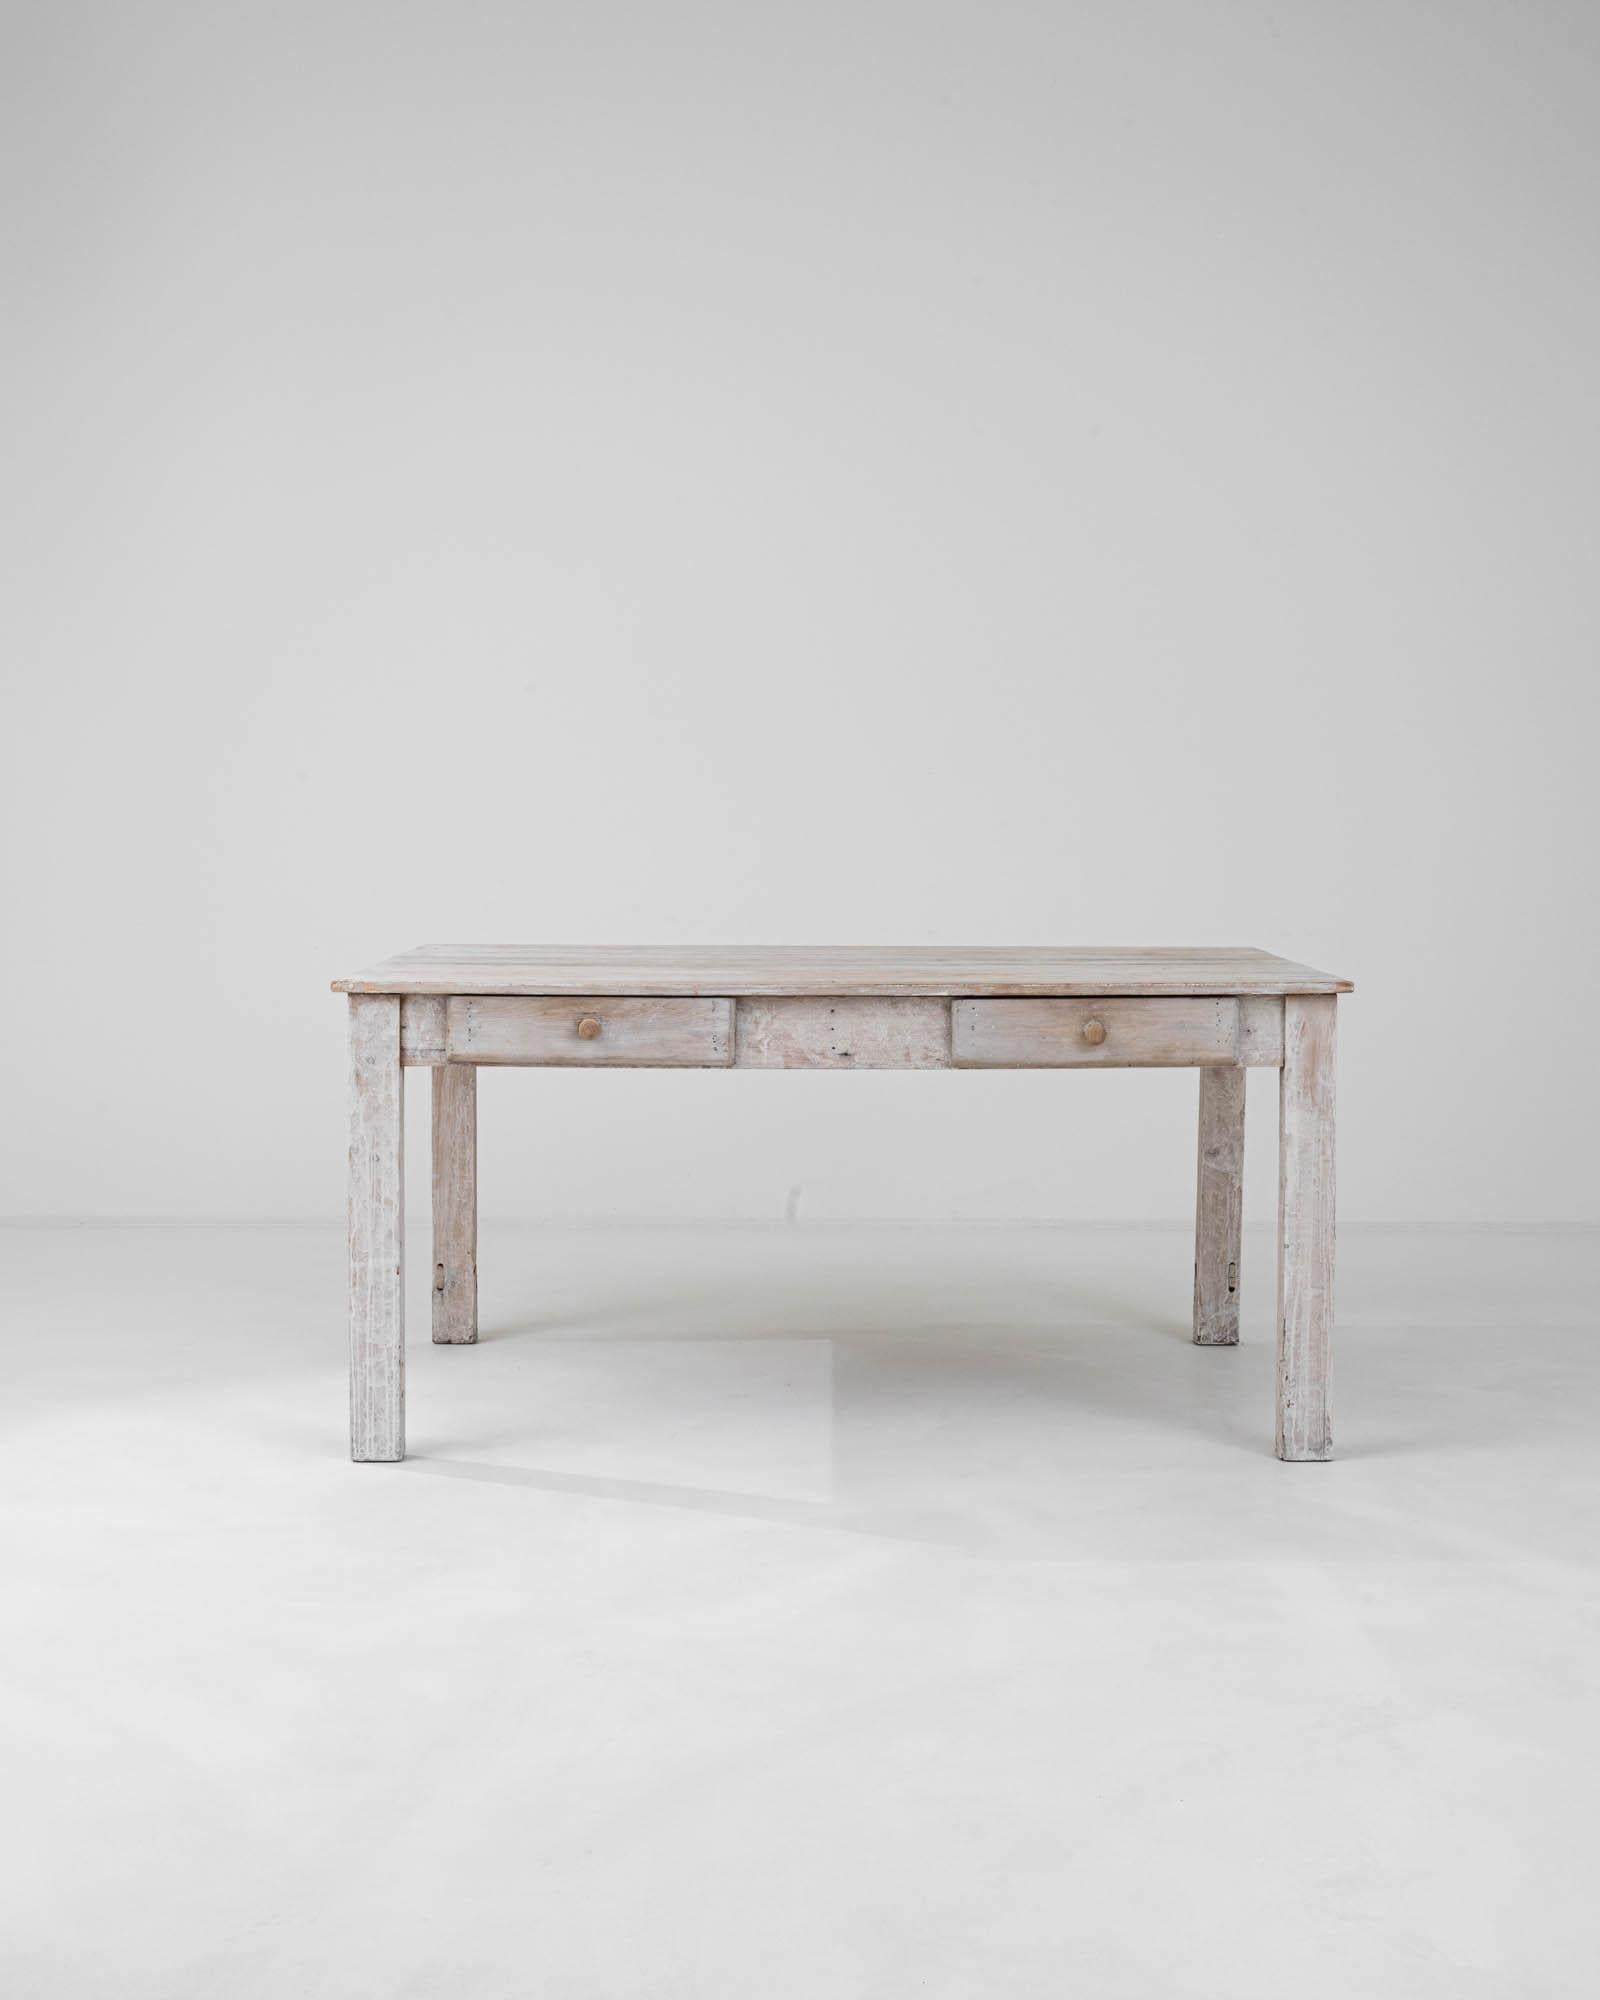 This 1900s French wood table, bearing the graceful wear of white patination, tells the story of a bygone era. The beautifully aged surface, with its natural wood grain peeking through the distressed finish, invites a sense of rustic charm into any